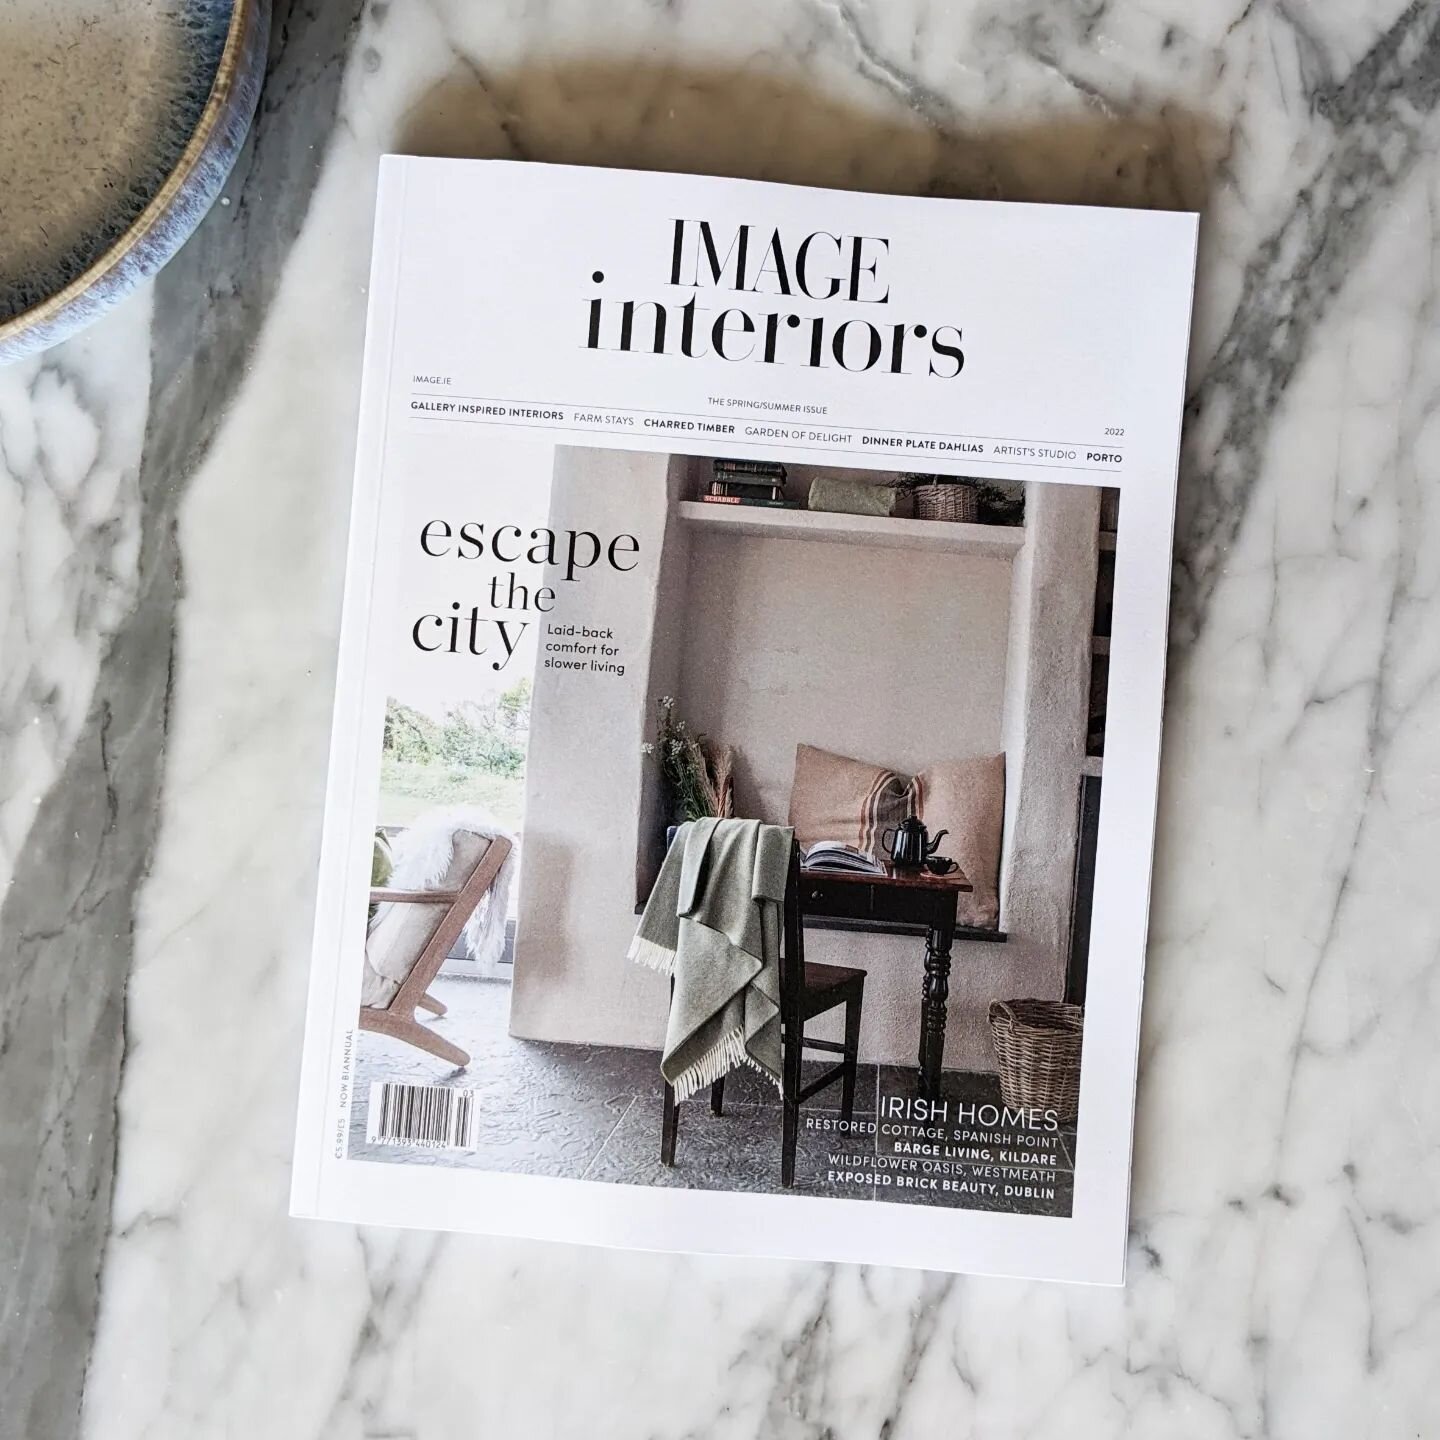 Great to be included in the latest Spring/Summer issue of Image Interiors magazine, thanks to all @image_interiors @image.ie Thanks also to @ruthmariaphotos and @fionnmccann for their wonderful photos and Amanda Kavanagh @googlepuns for her thoughtfu